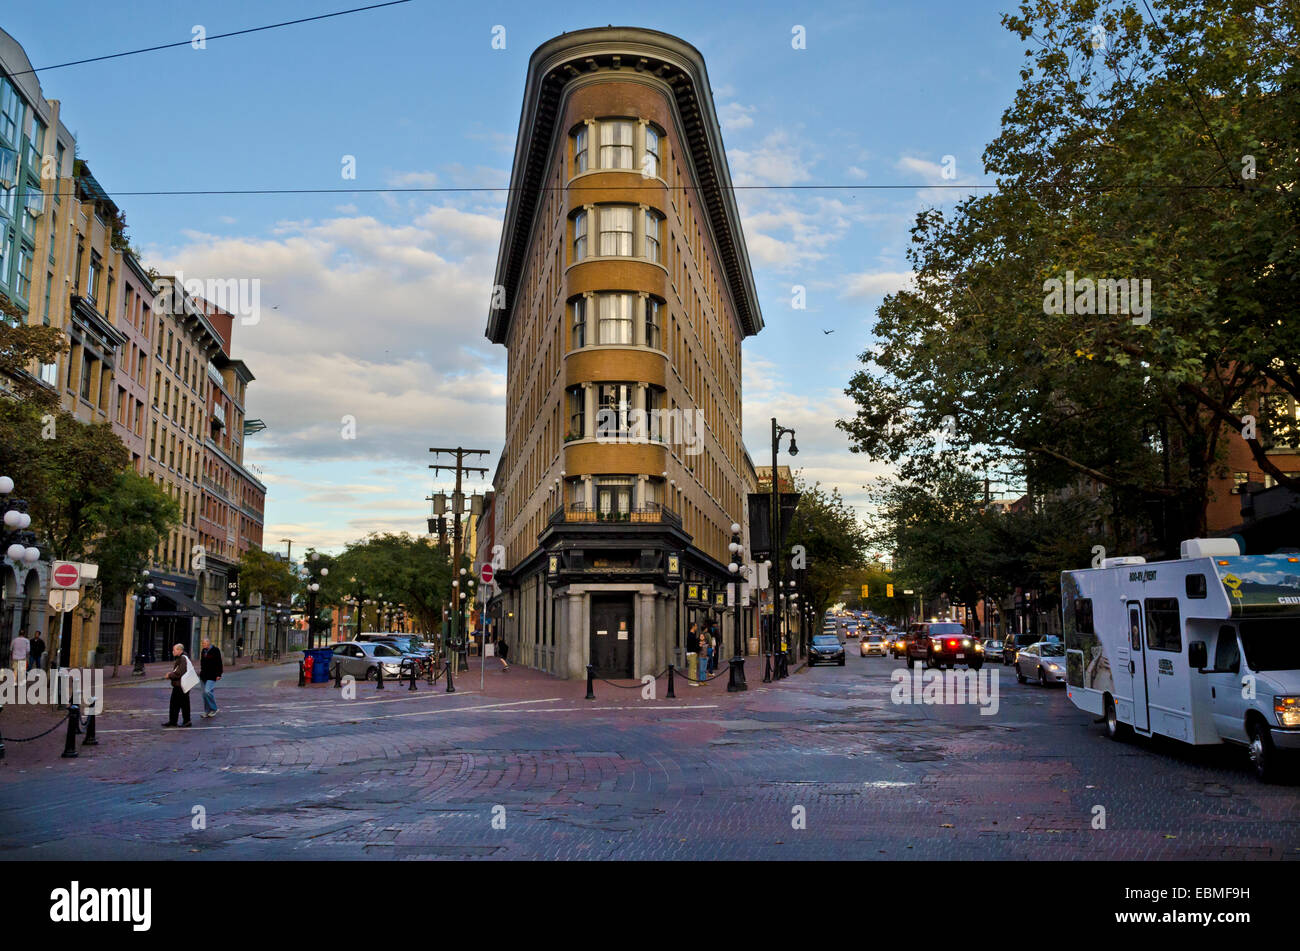 Hotel Europe, a historic flatiron style building in Gastown area of downtown Vancouver, BC, Canada. Stock Photo